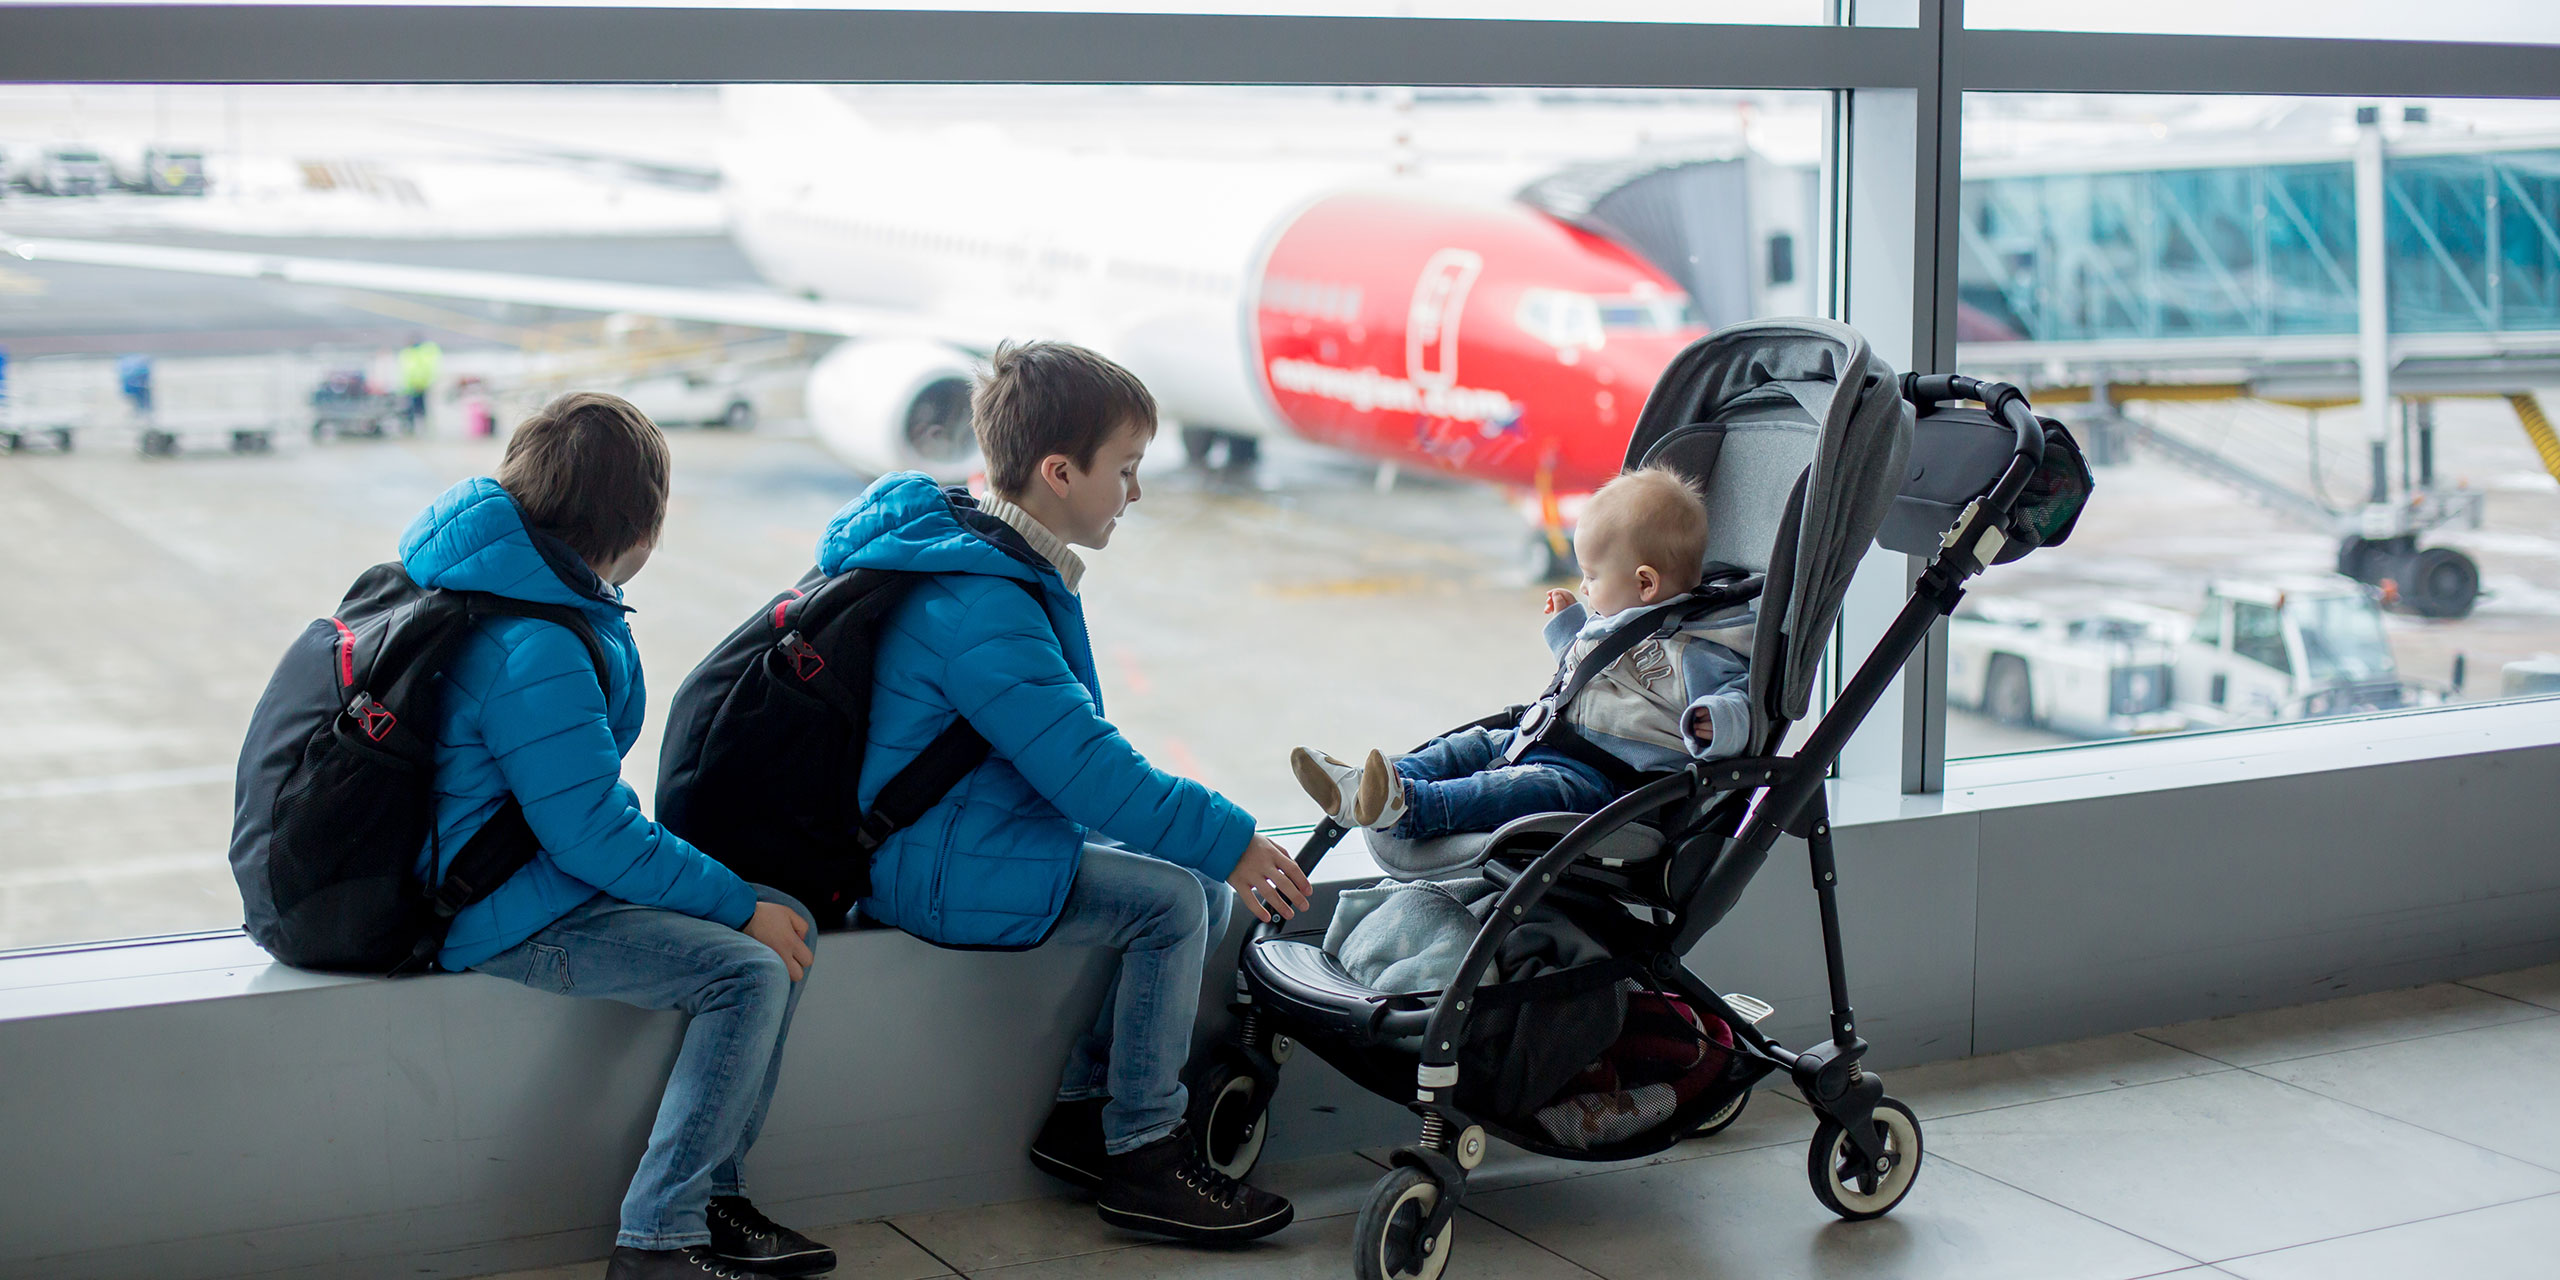 Kids with Stroller at Airport; Courtesy of Tomsickova Tatyana/Shutterstock.com